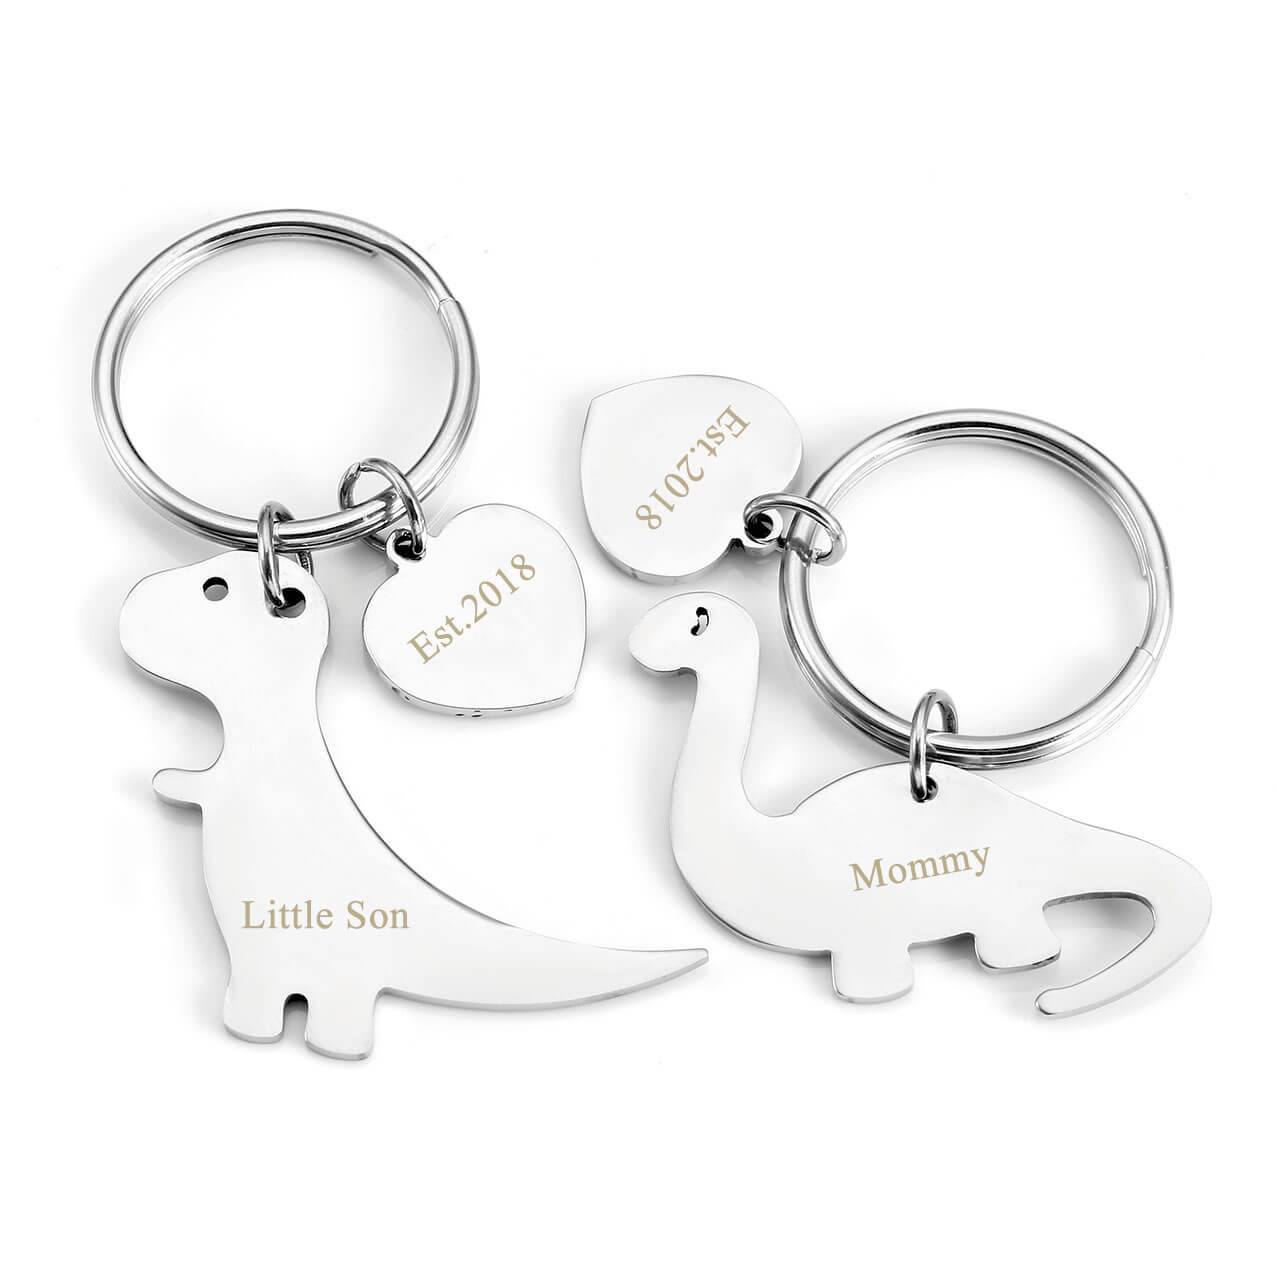 jovivi stainless steel name tag dinosaur keychain set for mom and baby, jnf004002